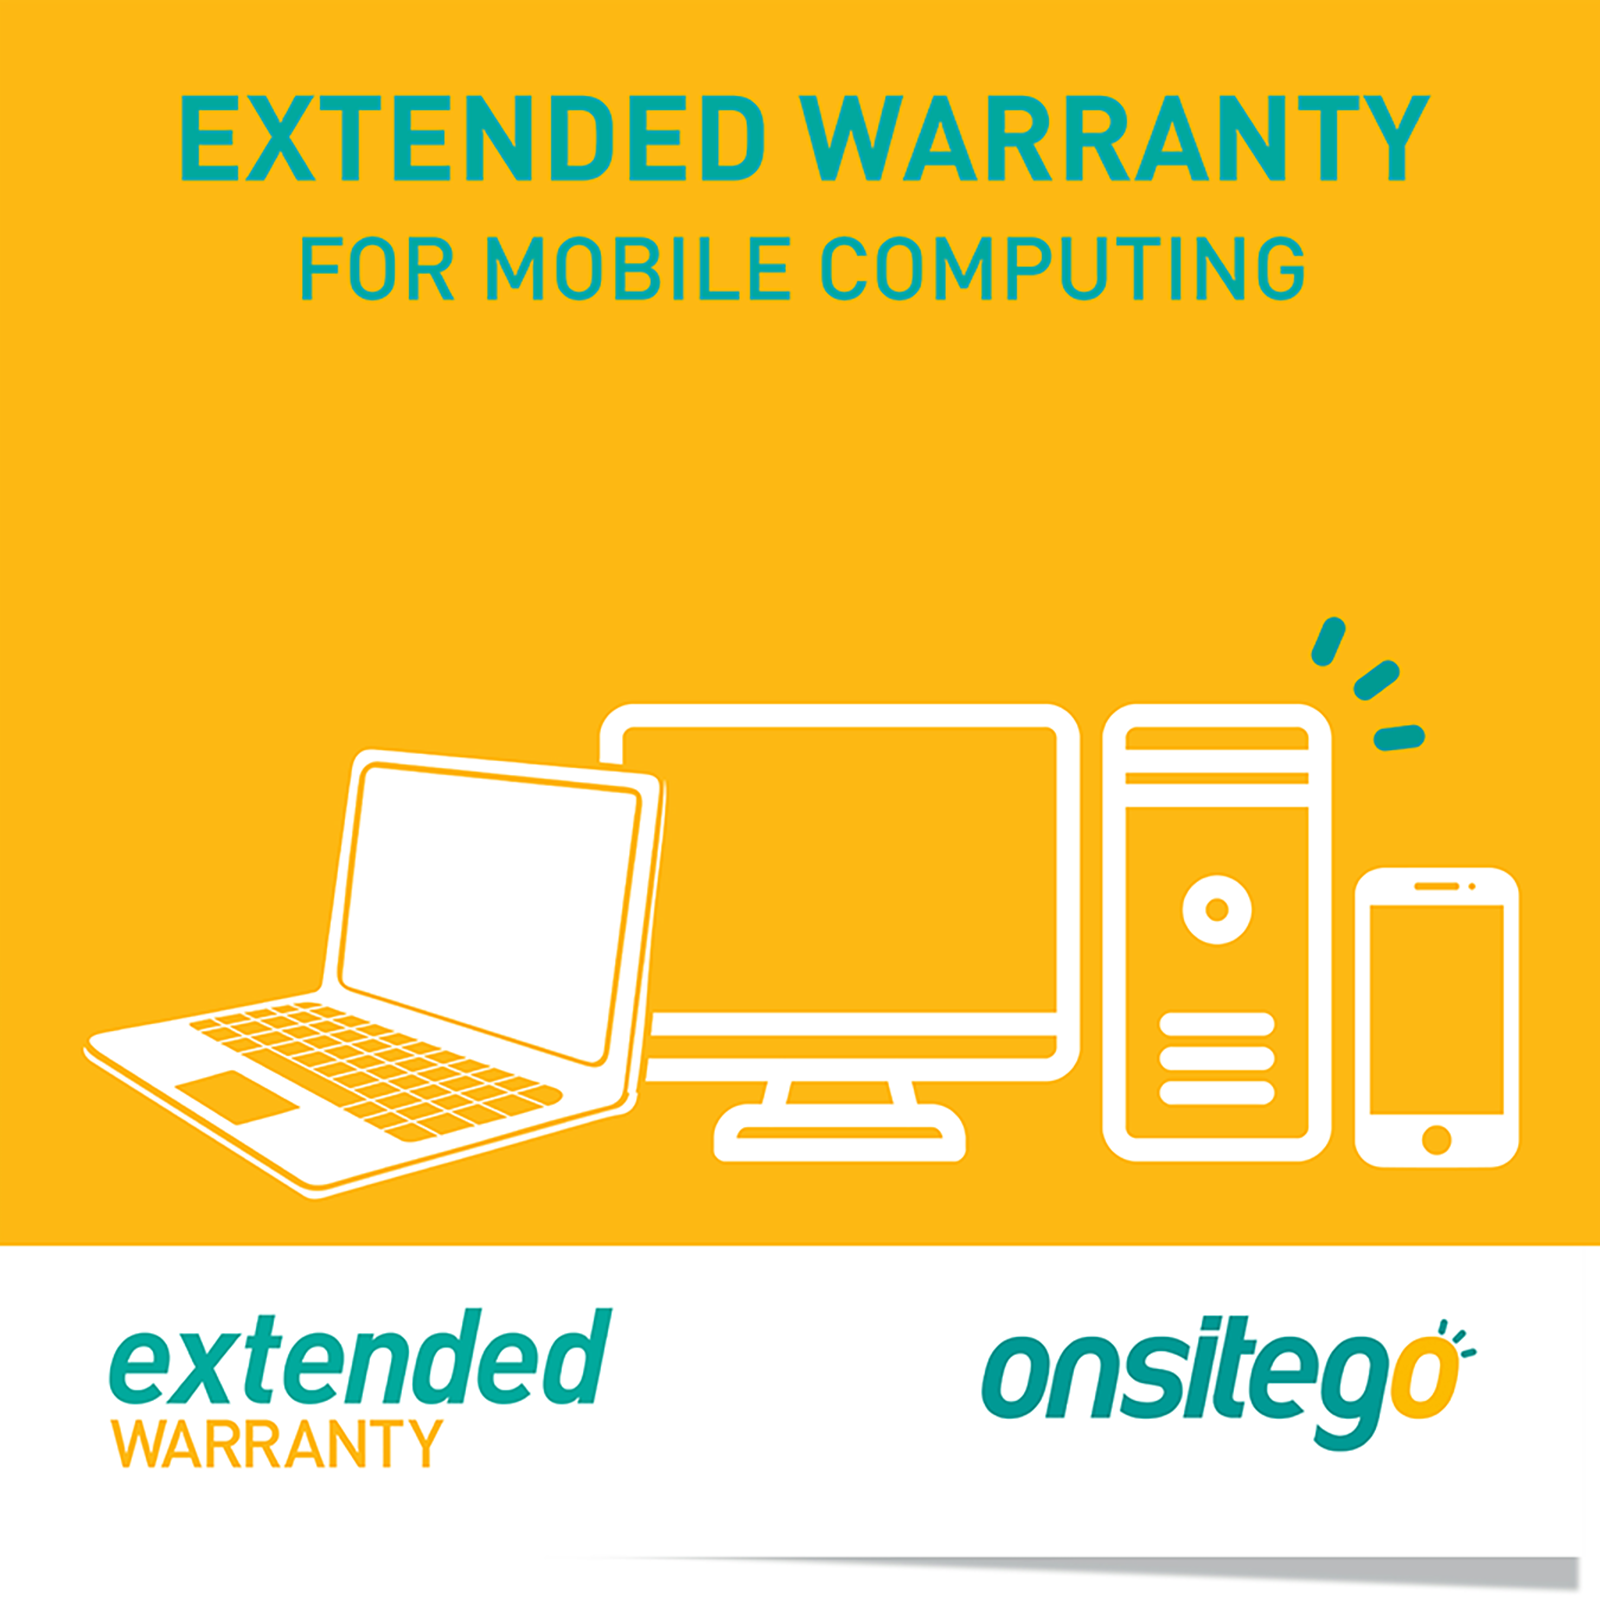 Onsitego 3 Year Extended Warranty for Laptop (Rs.70,000 - Rs.100,000)_1